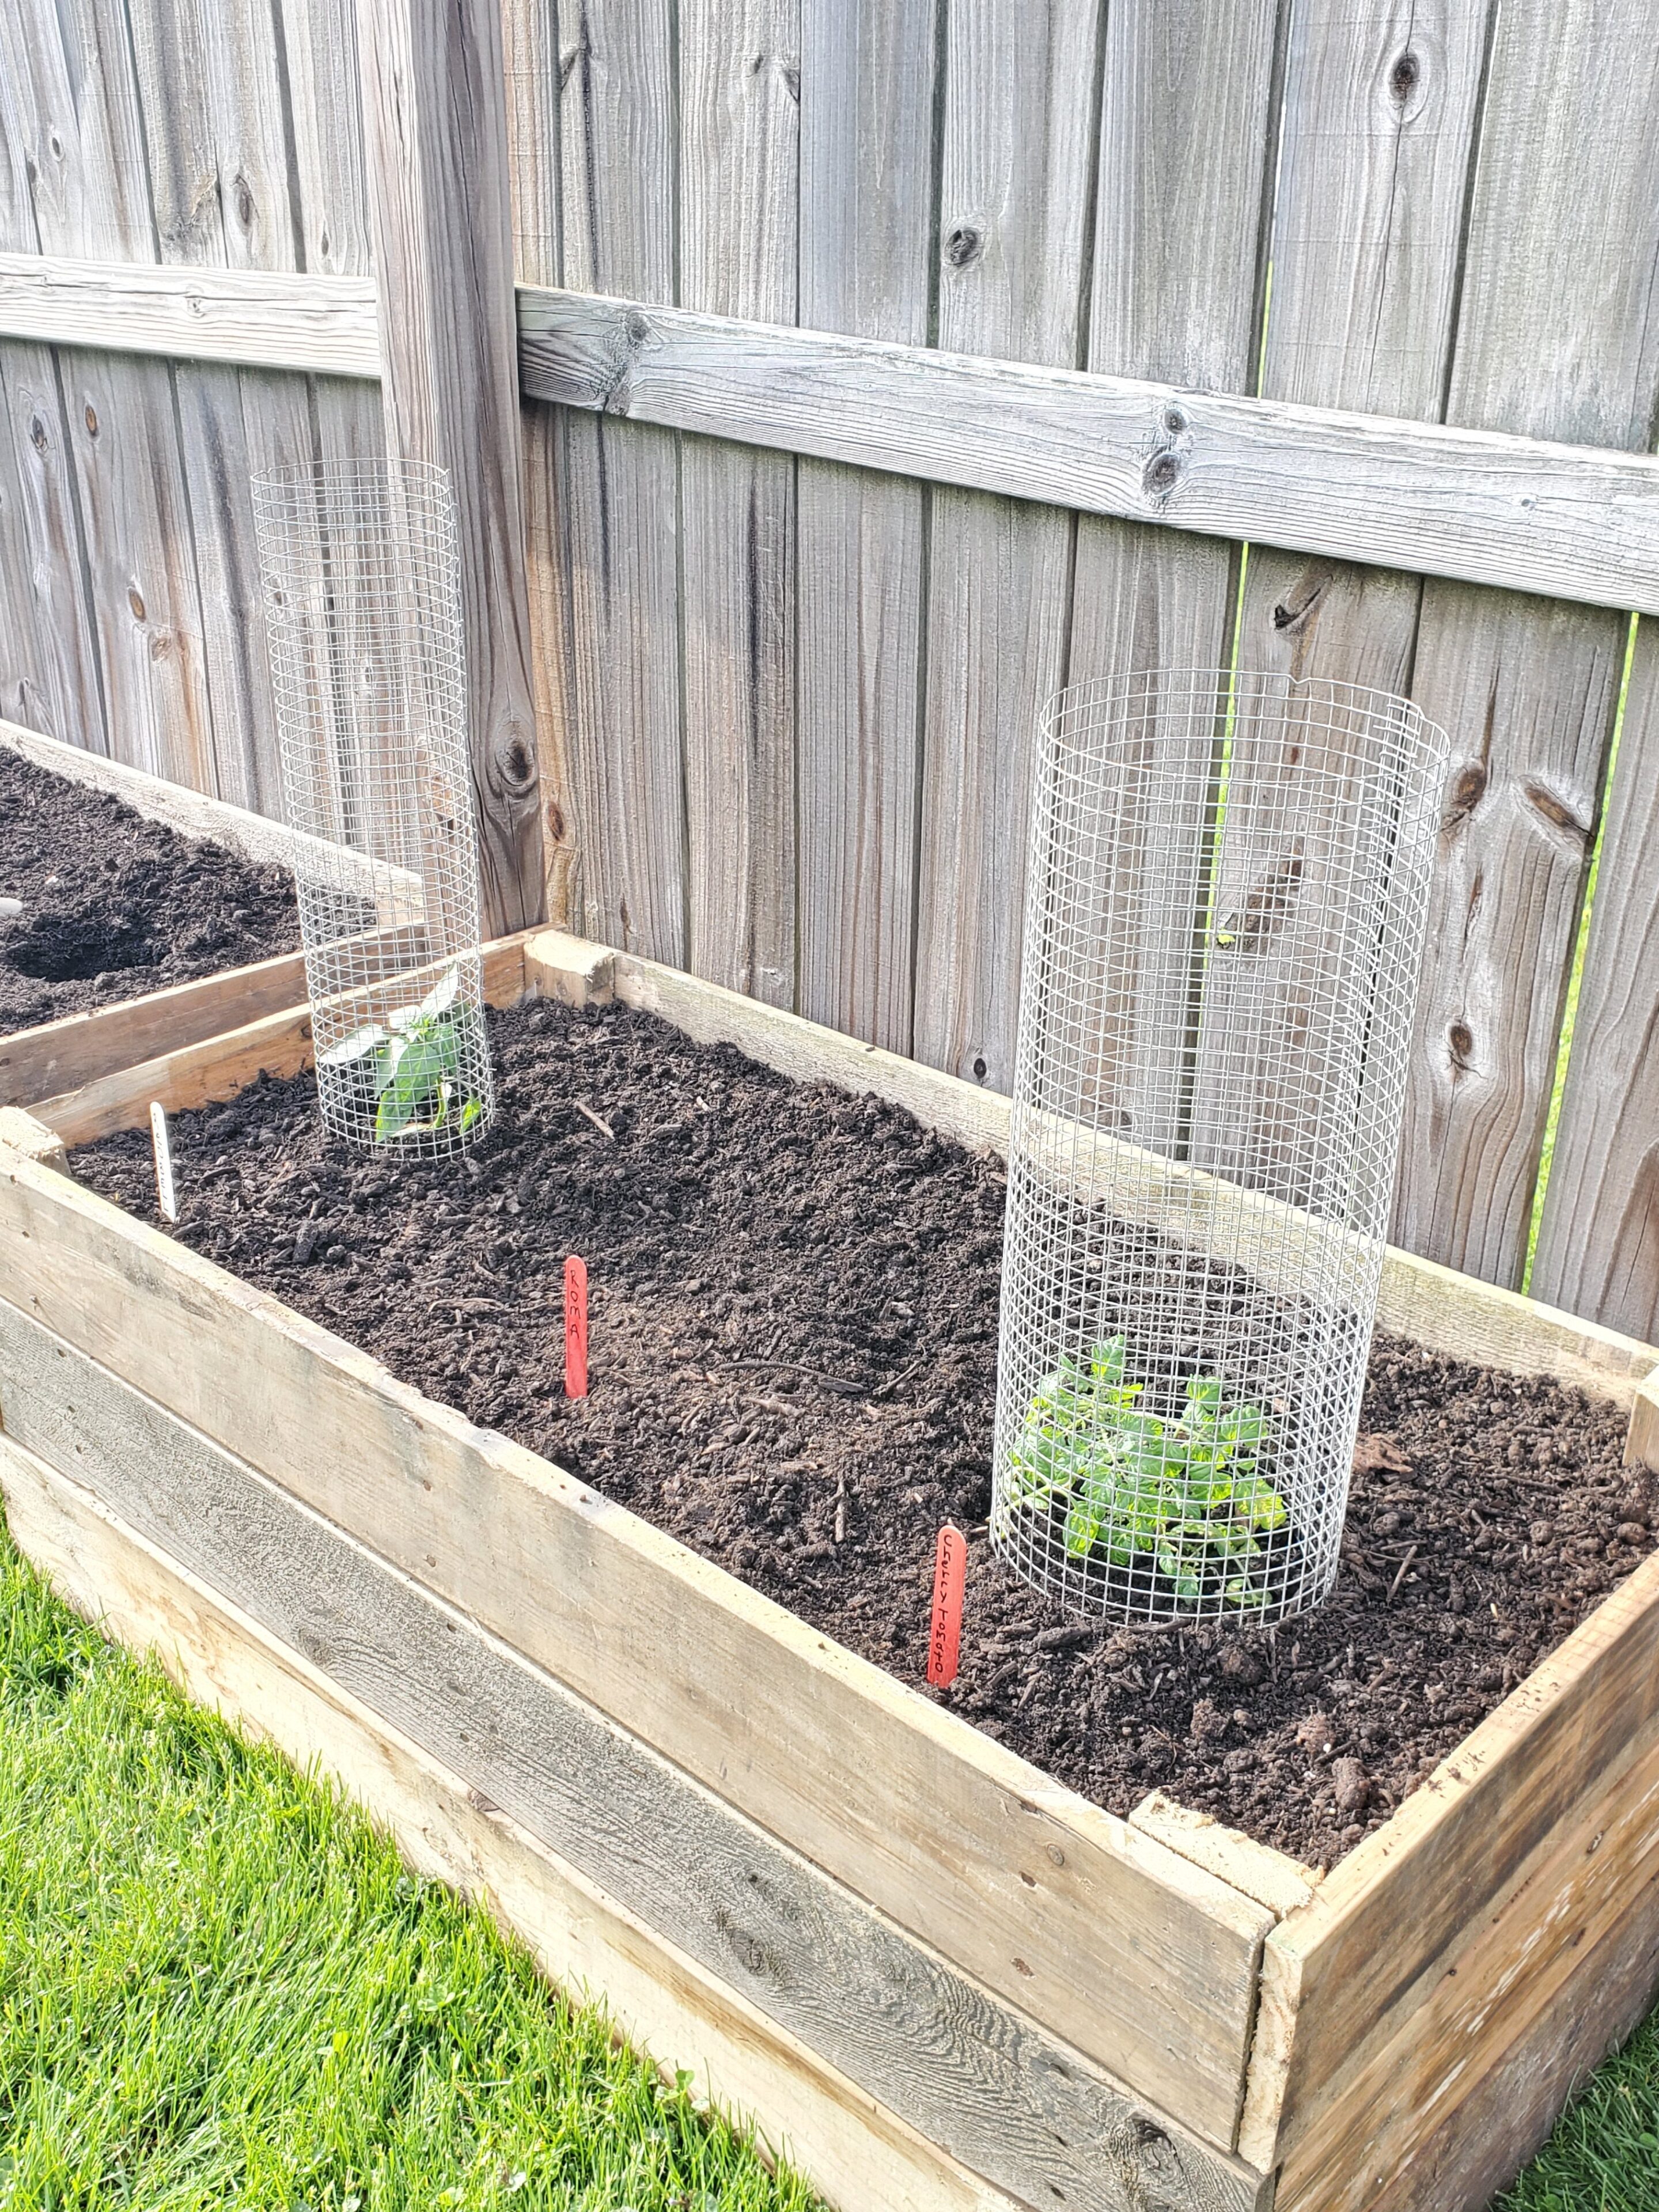 How To Build Raised Garden Beds From, Building A Raised Garden Bed From Pallets